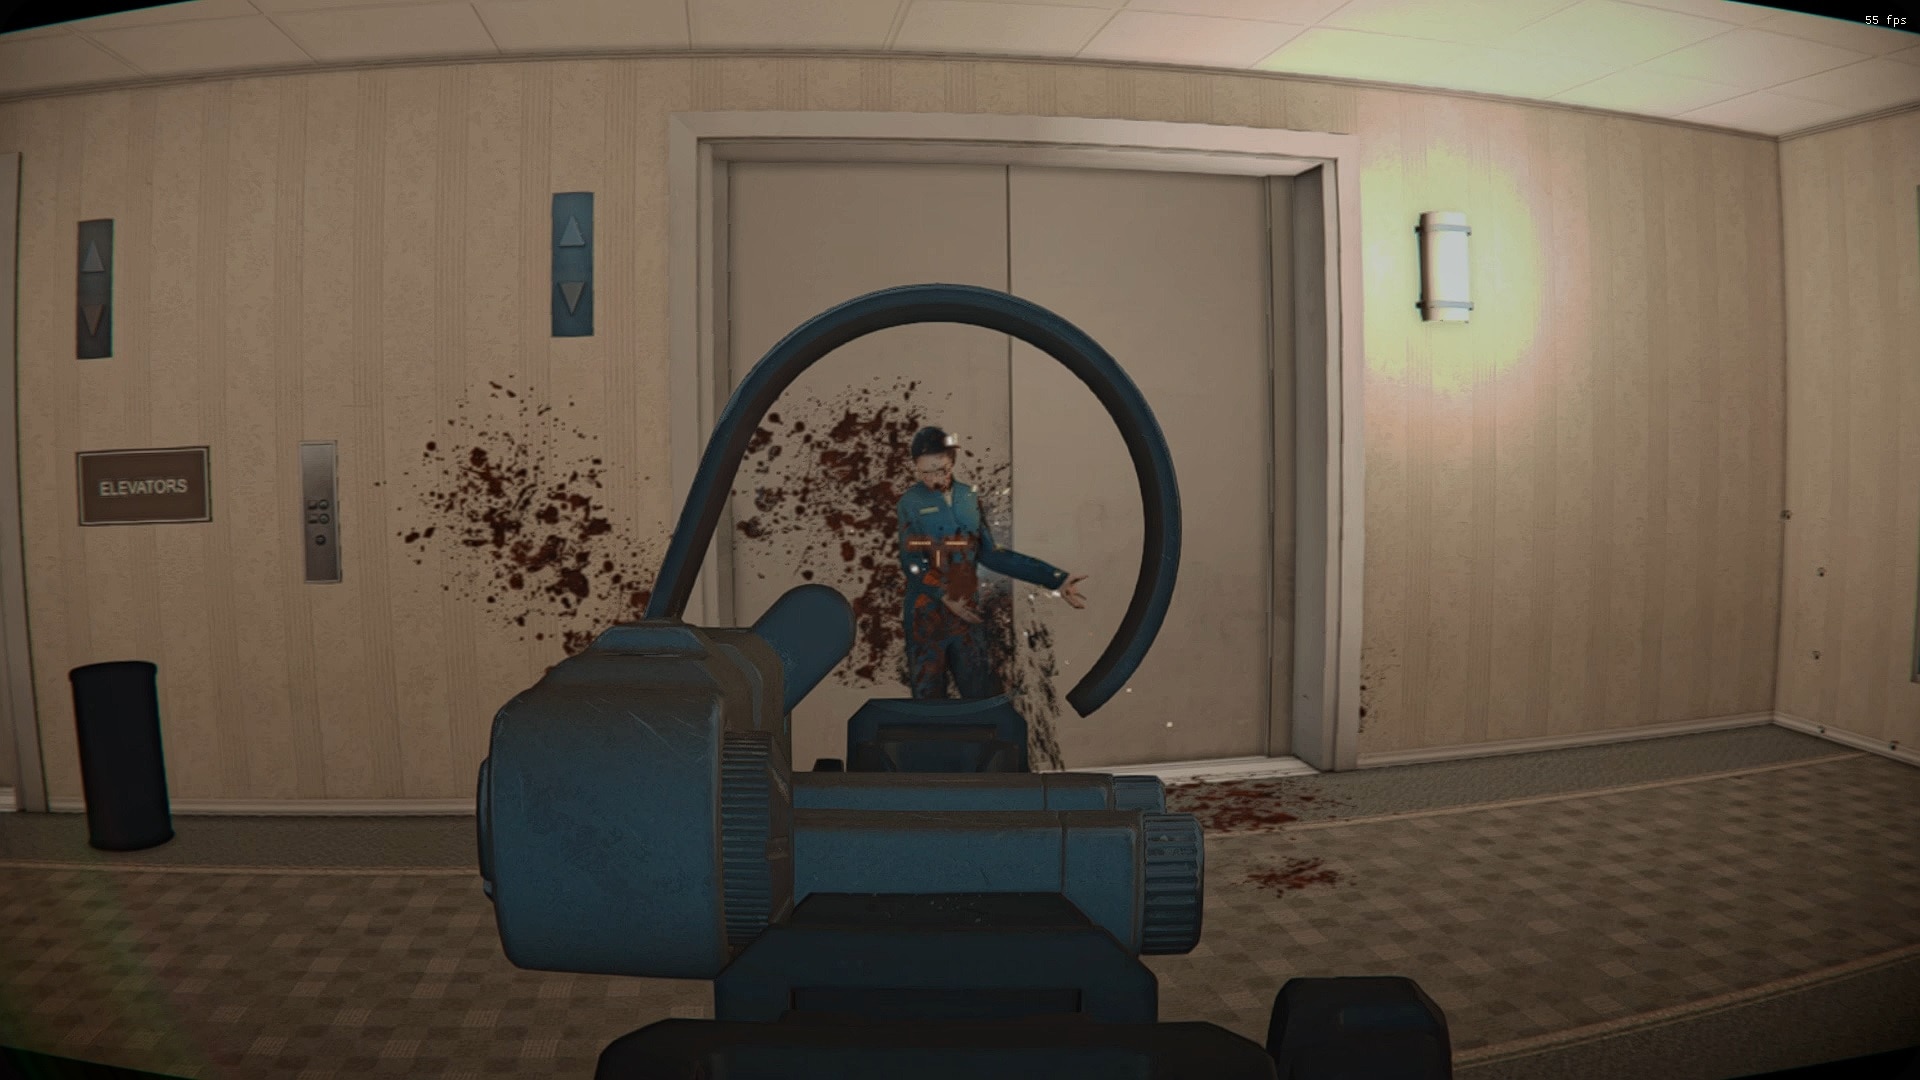 I tried to make gmod realistic, although I know there are some